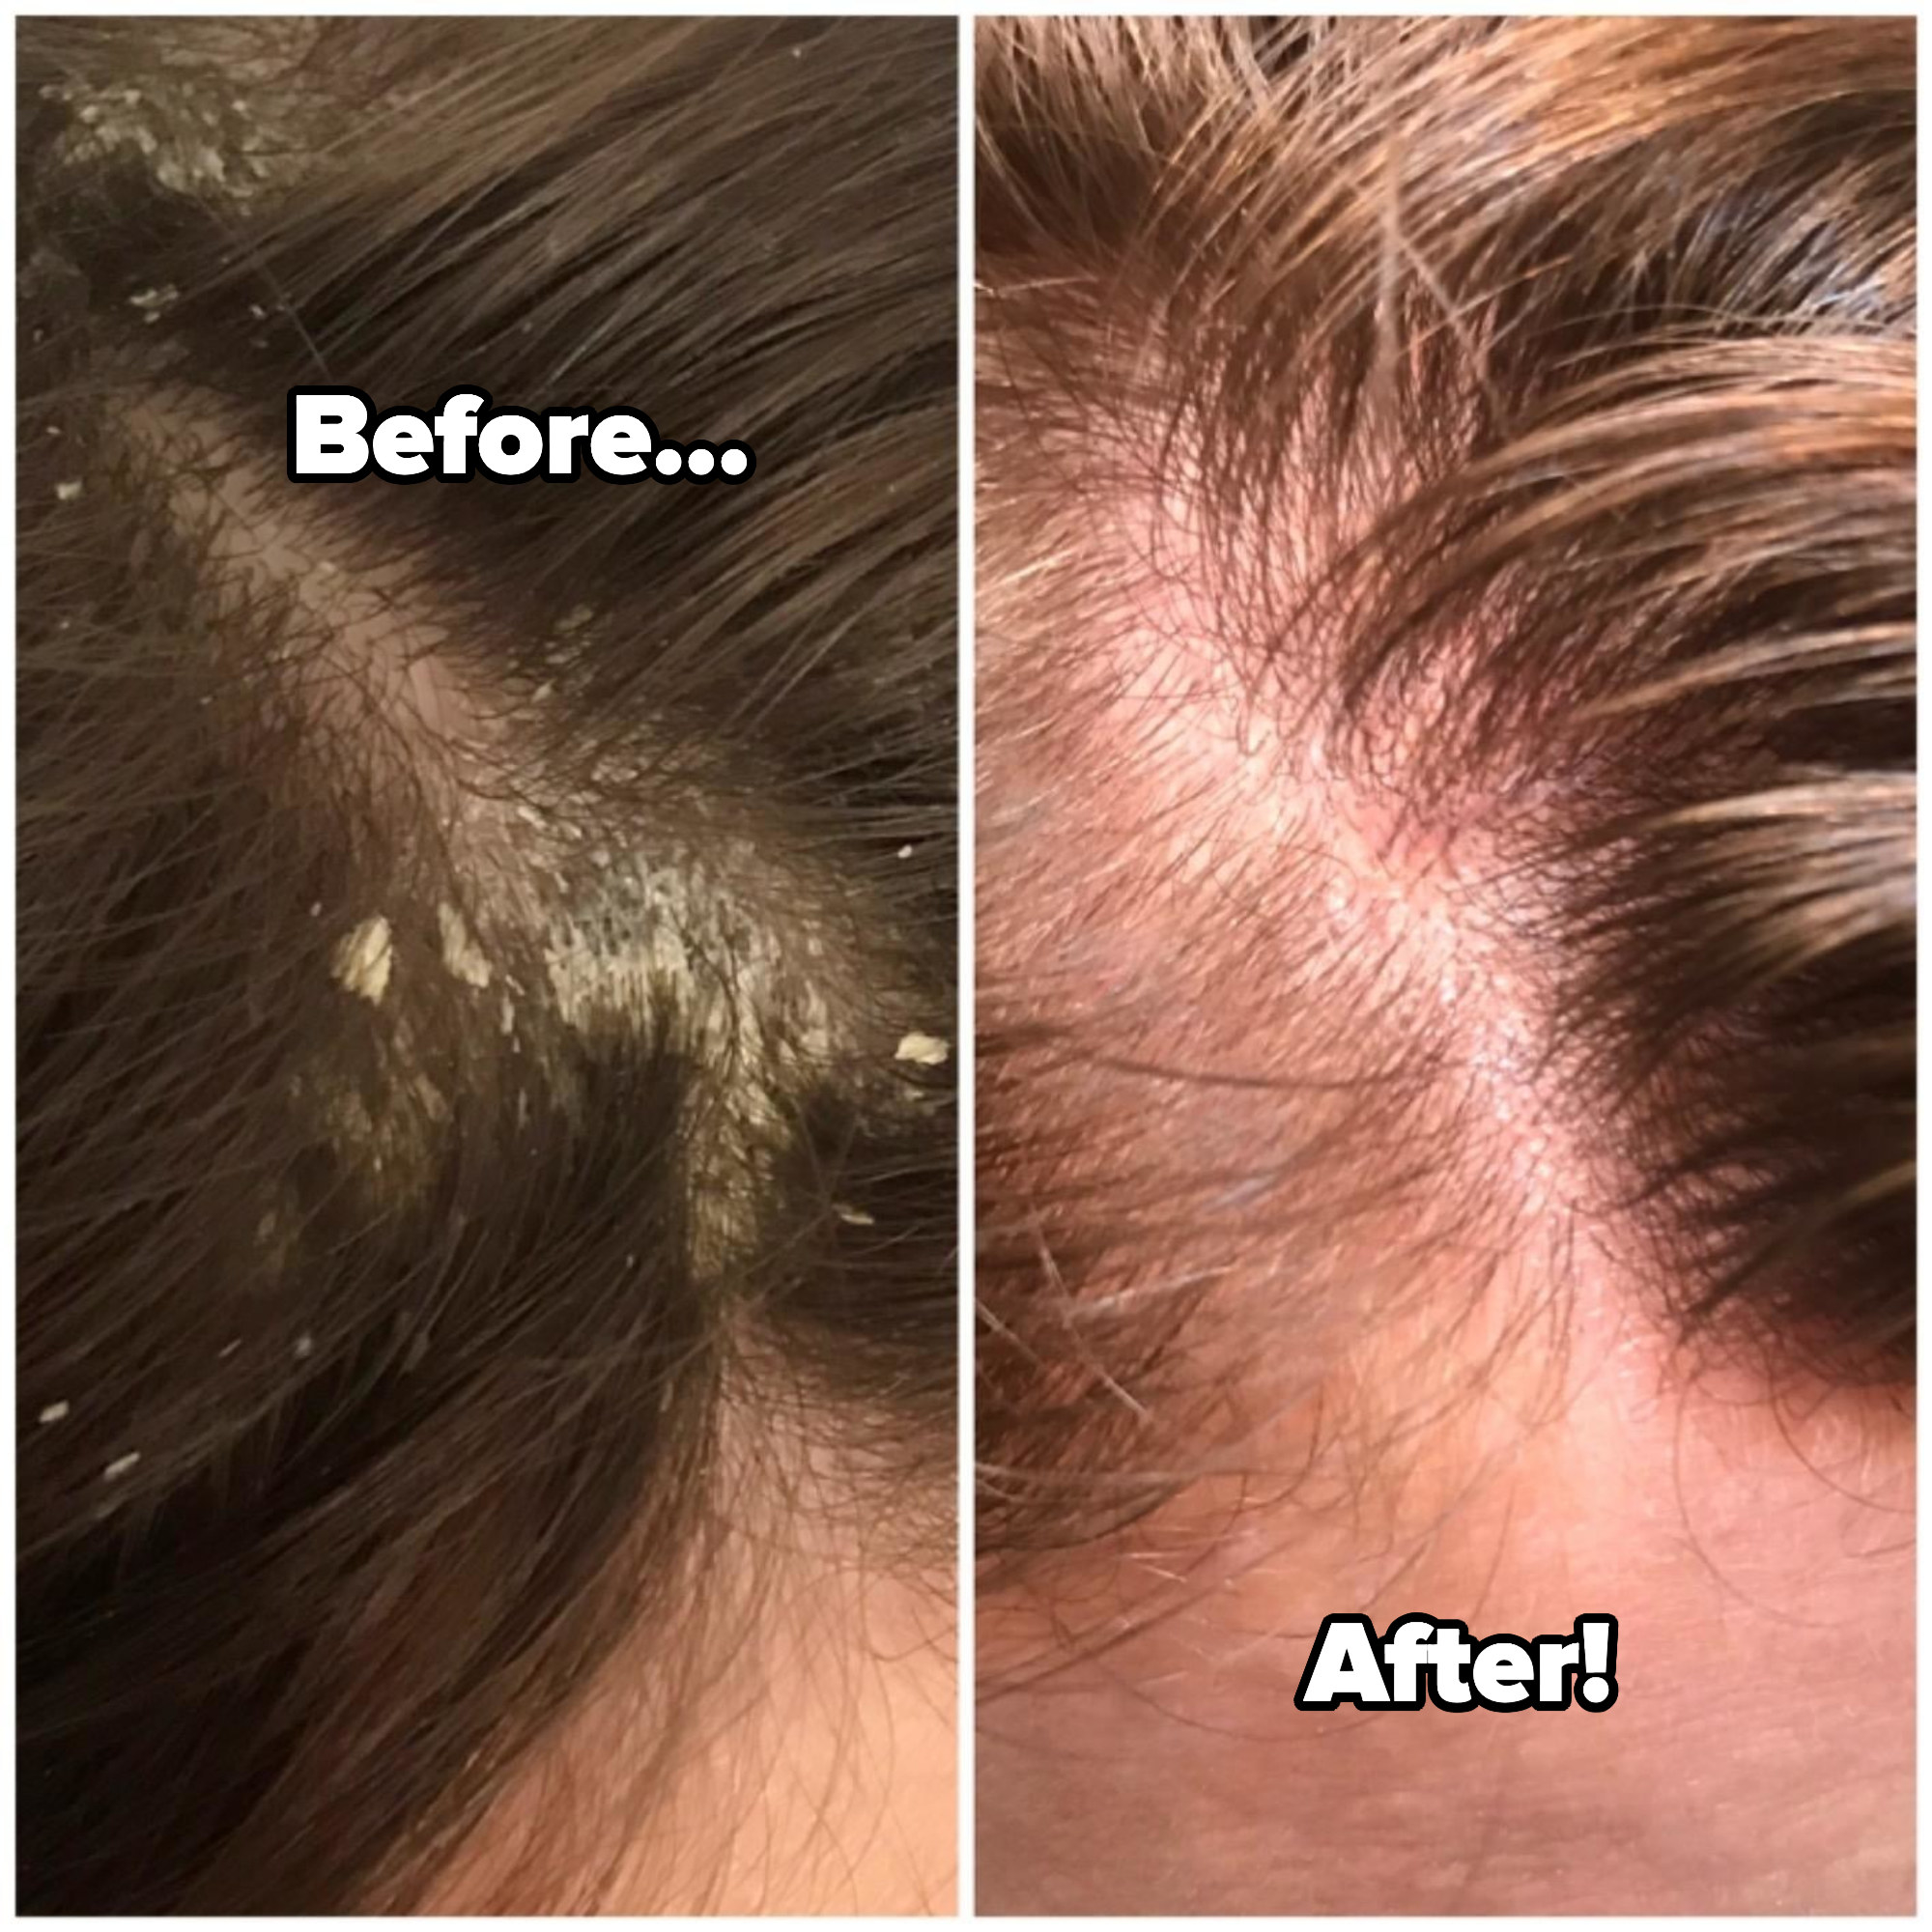 Reviewer before and after photos showing a flaky scalp next to one that's flake-free after using the anti-dandruff shampoo